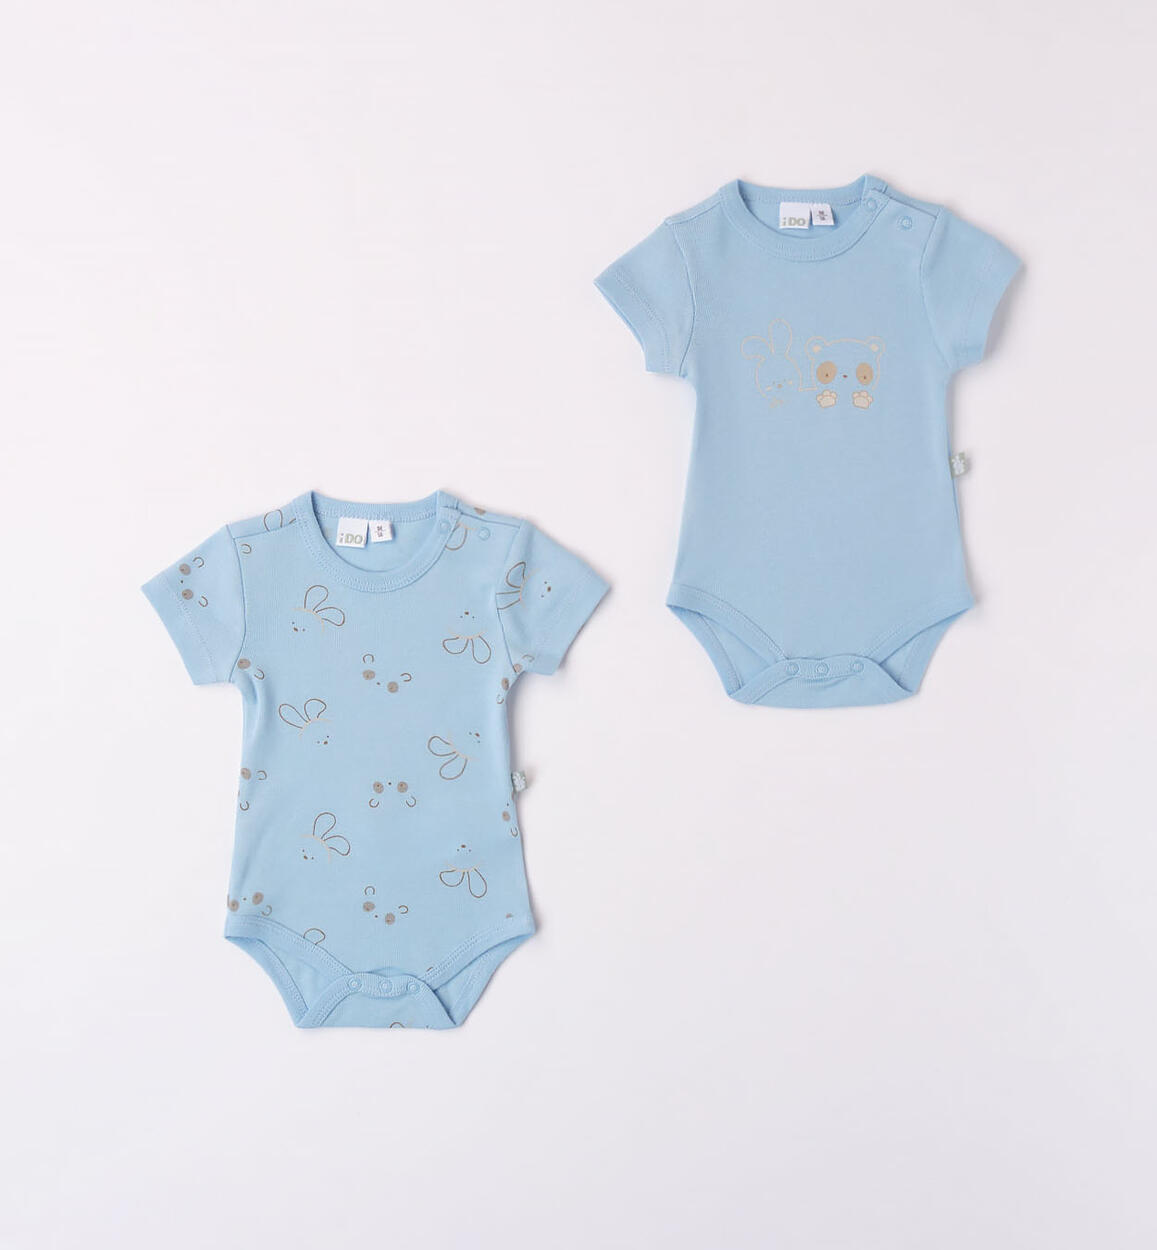 iDO set of two 100% cotton bodysuits for babies